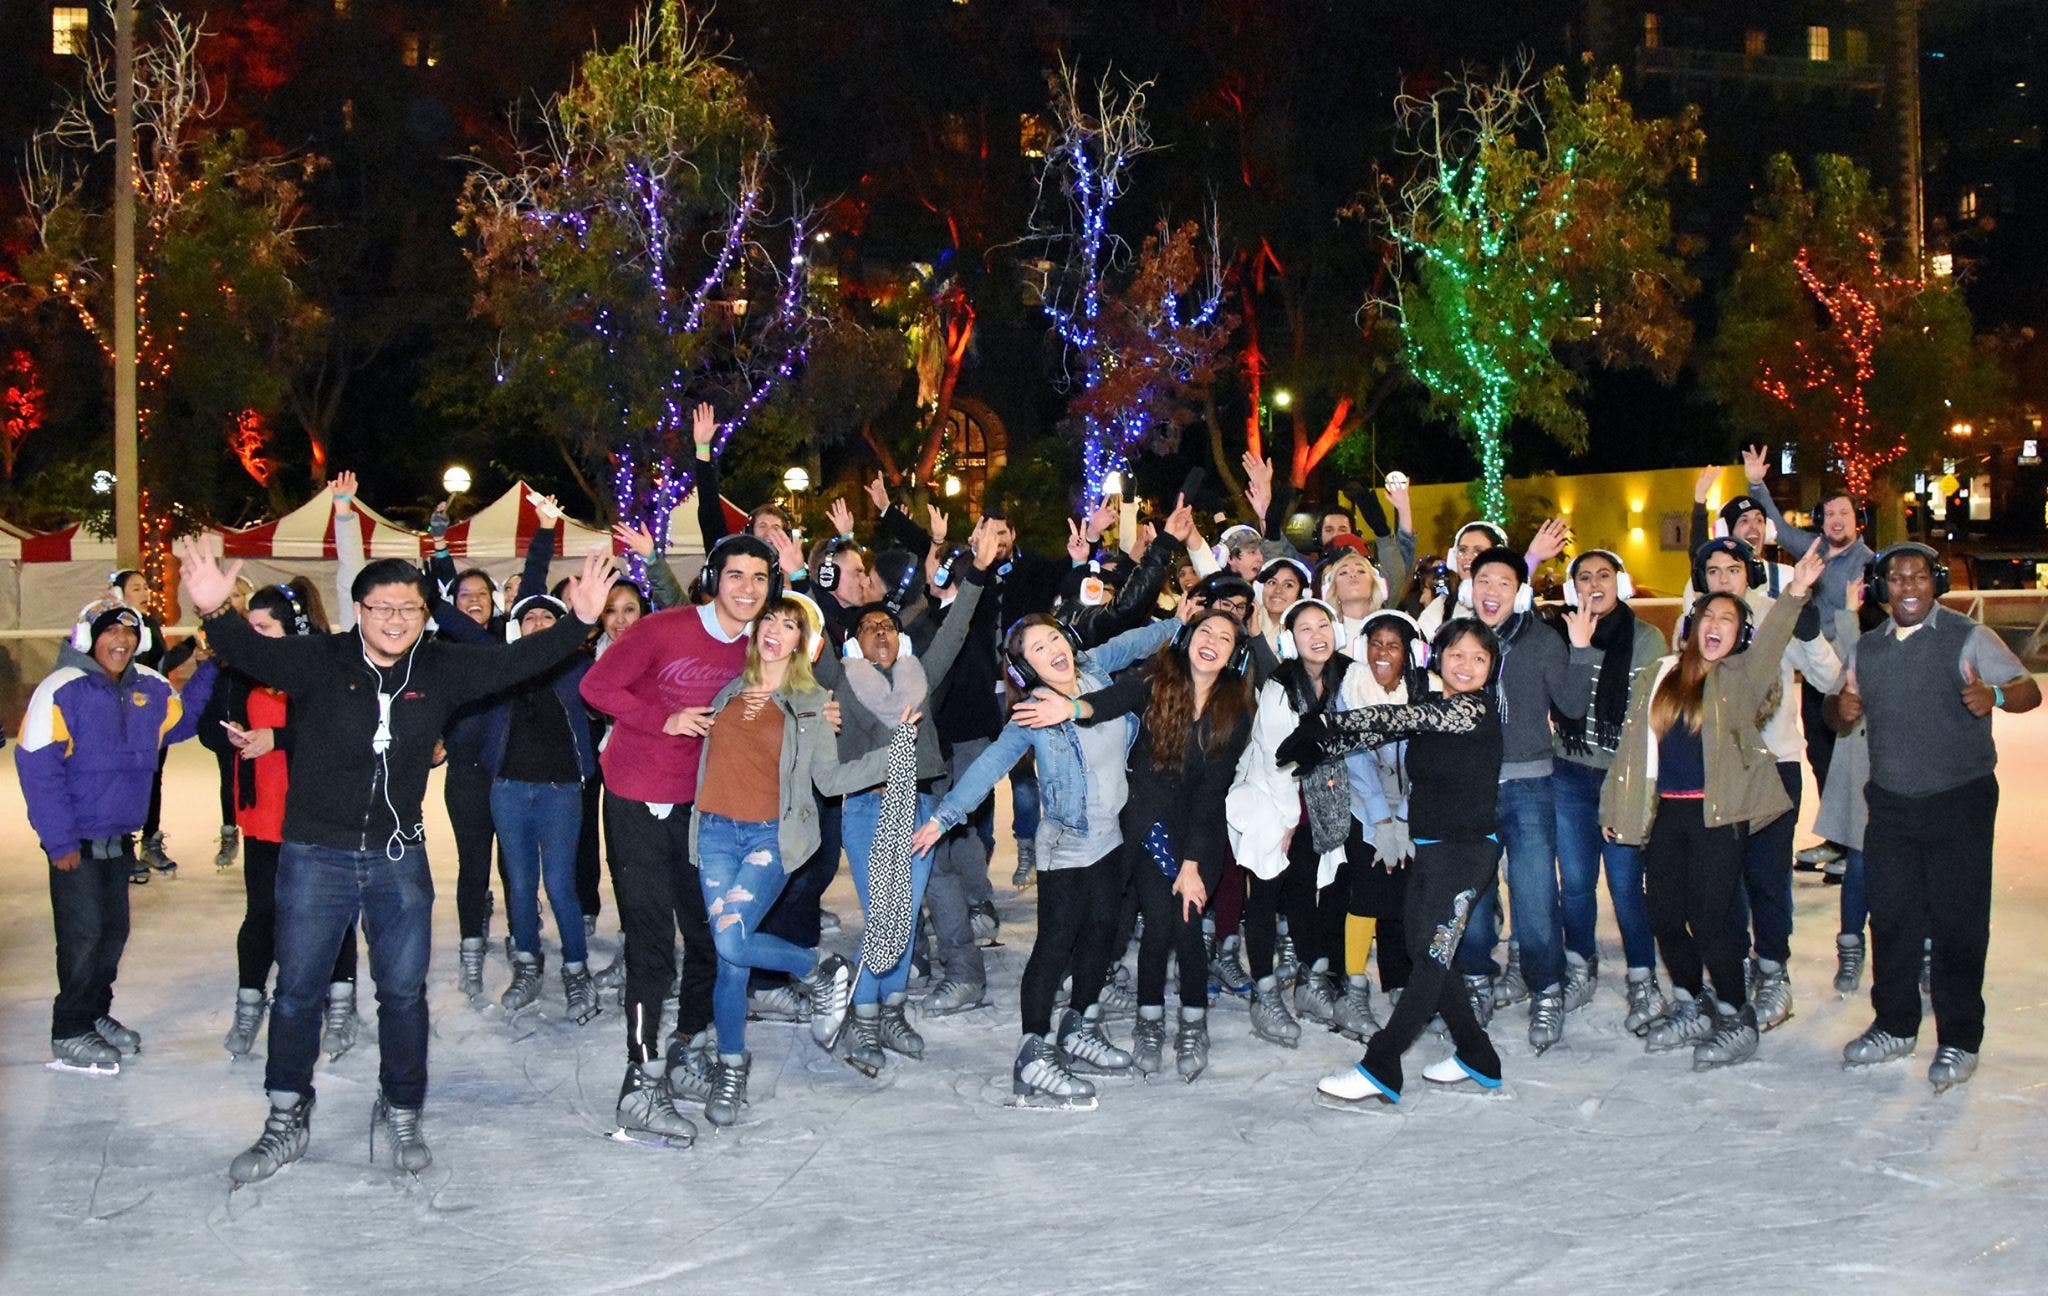 Silent Skate Party at the Bai Holiday Ice Rink Pershing Square